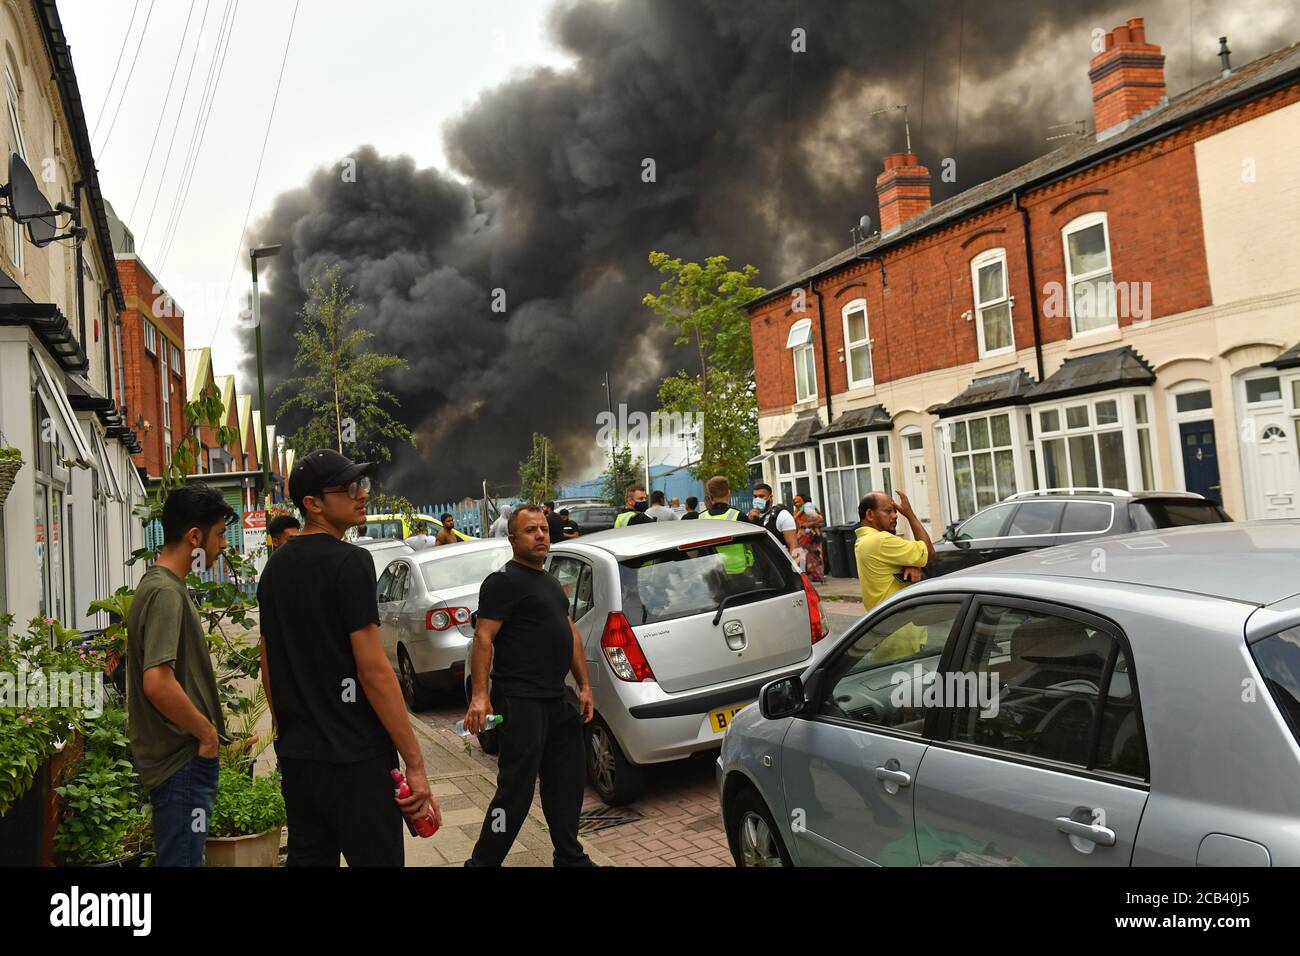 Local residents watch on as smoke billows from a severe blaze on an industrial estate in Birmingham. Crews from 10 fire engines are tackling the fire. Stock Photo